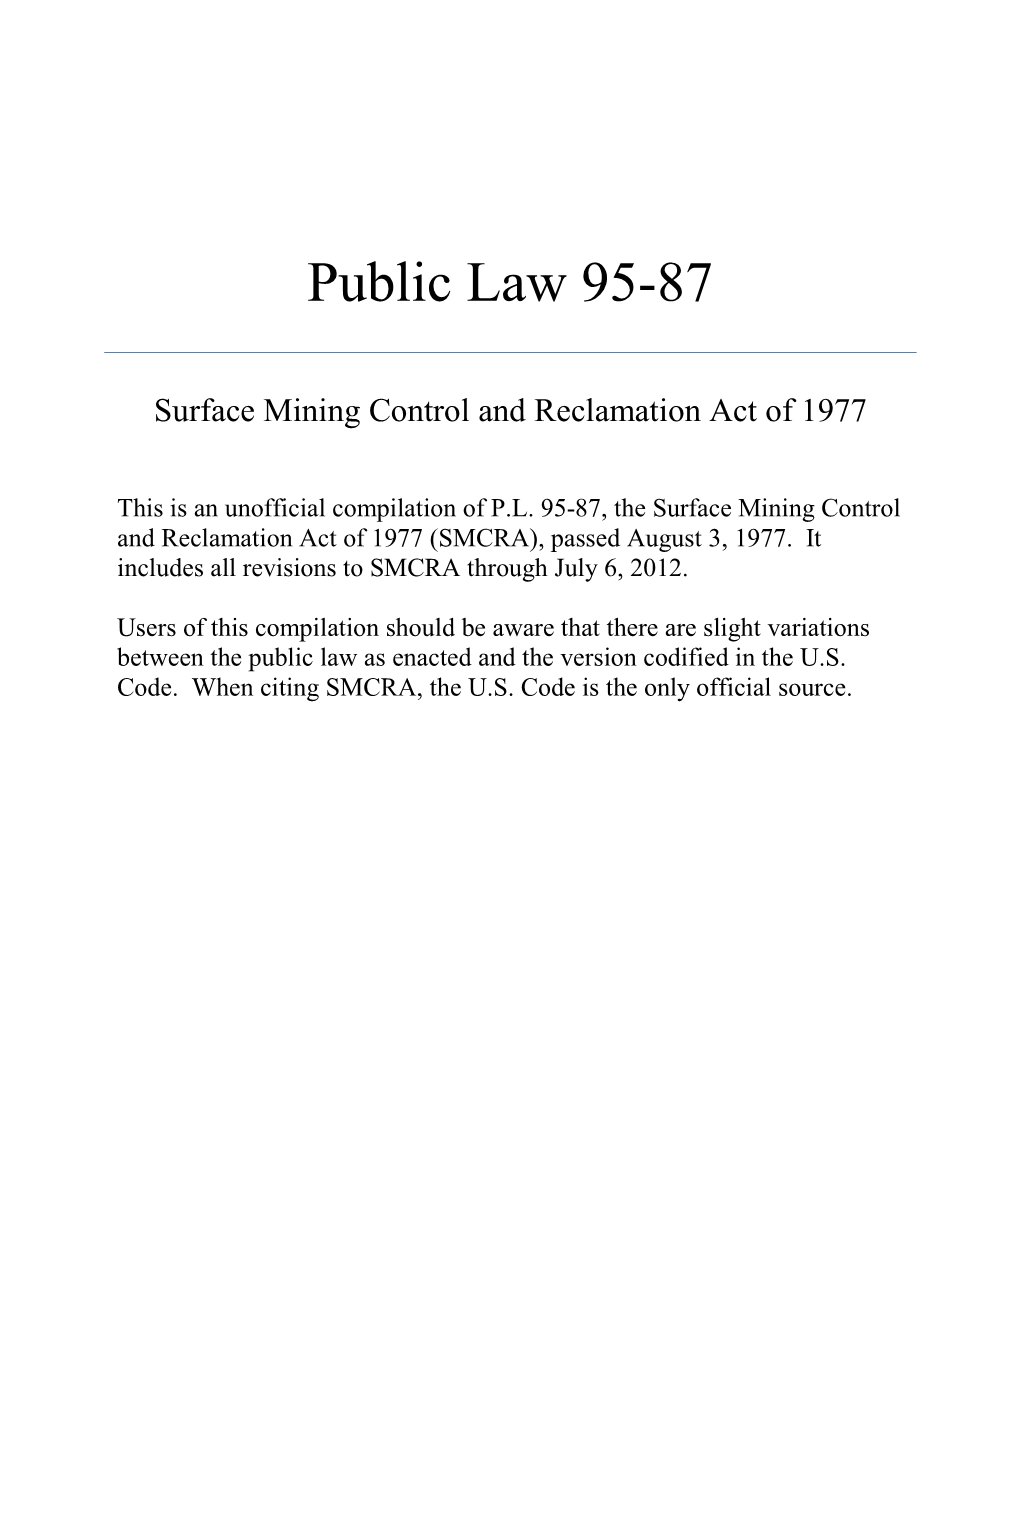 Surface Mining Control and Reclamation Act of 1977 (SMCRA), Passed August 3, 1977